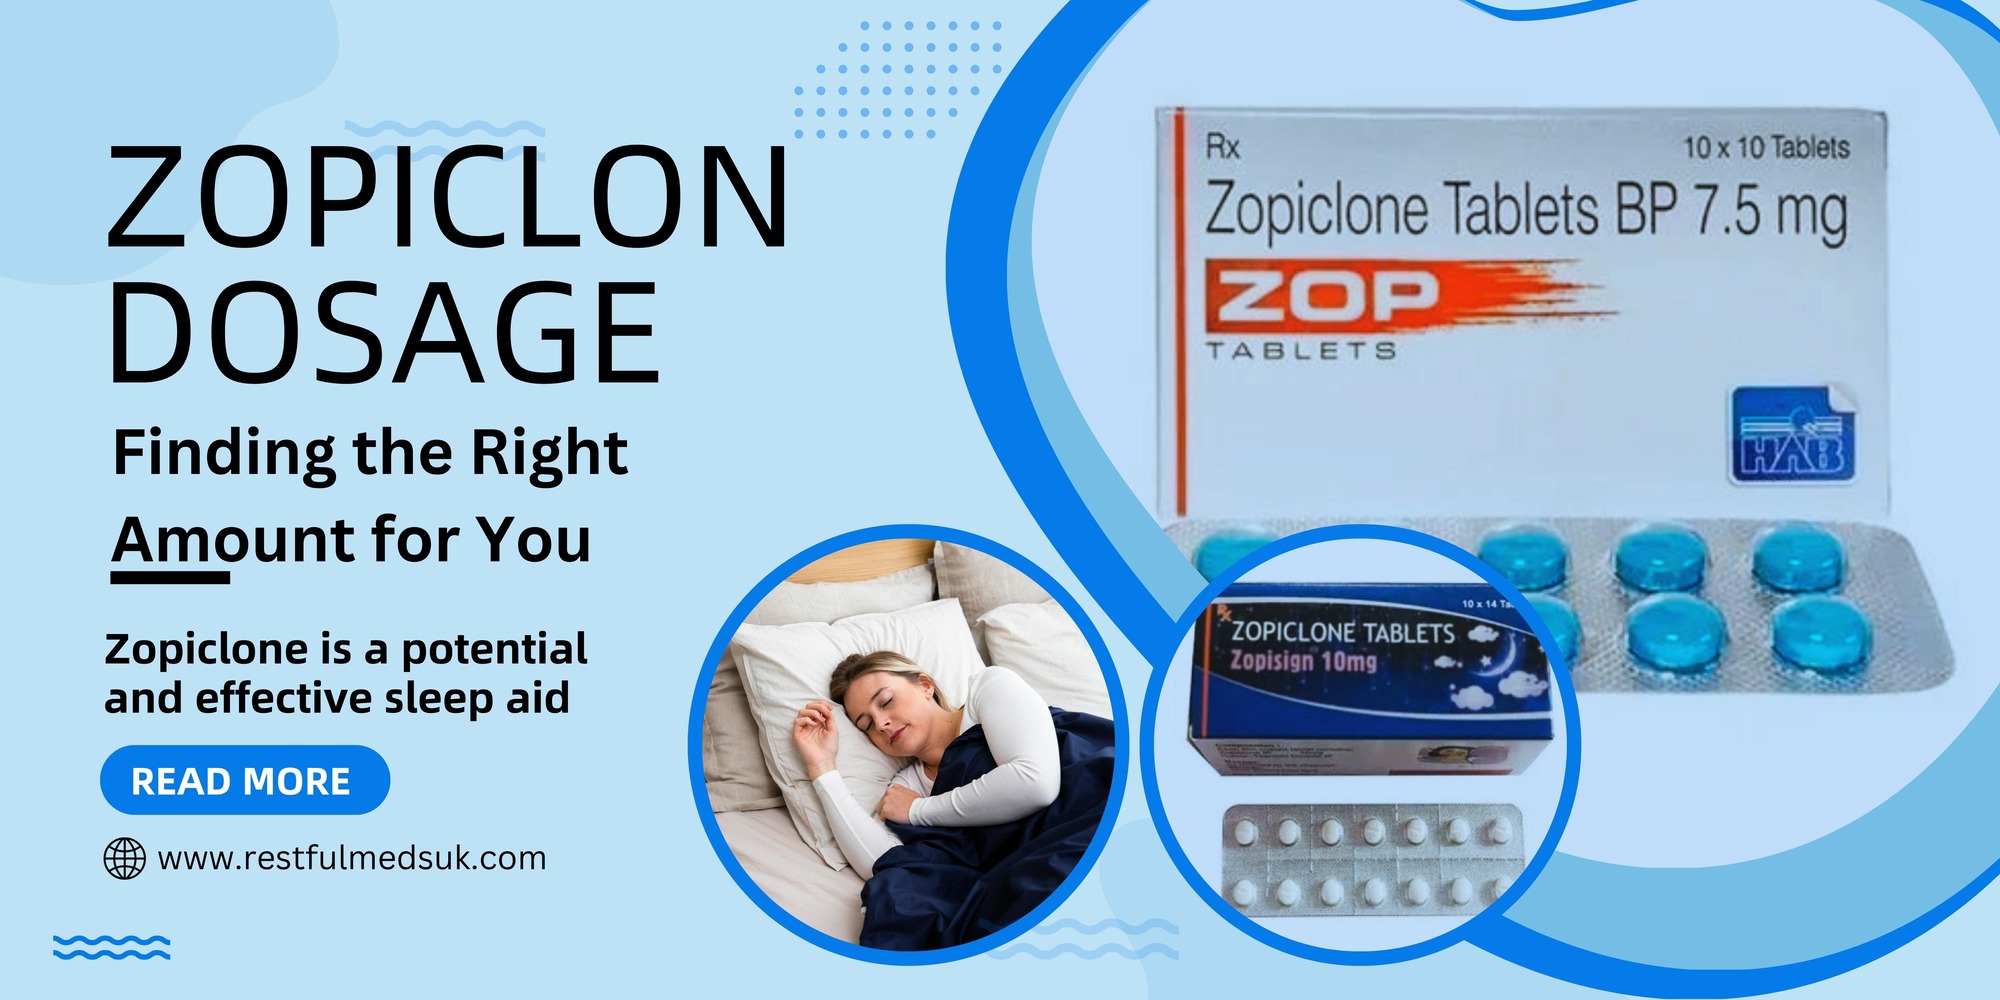 Zopiclone Dosage: Finding the Right Amount for You